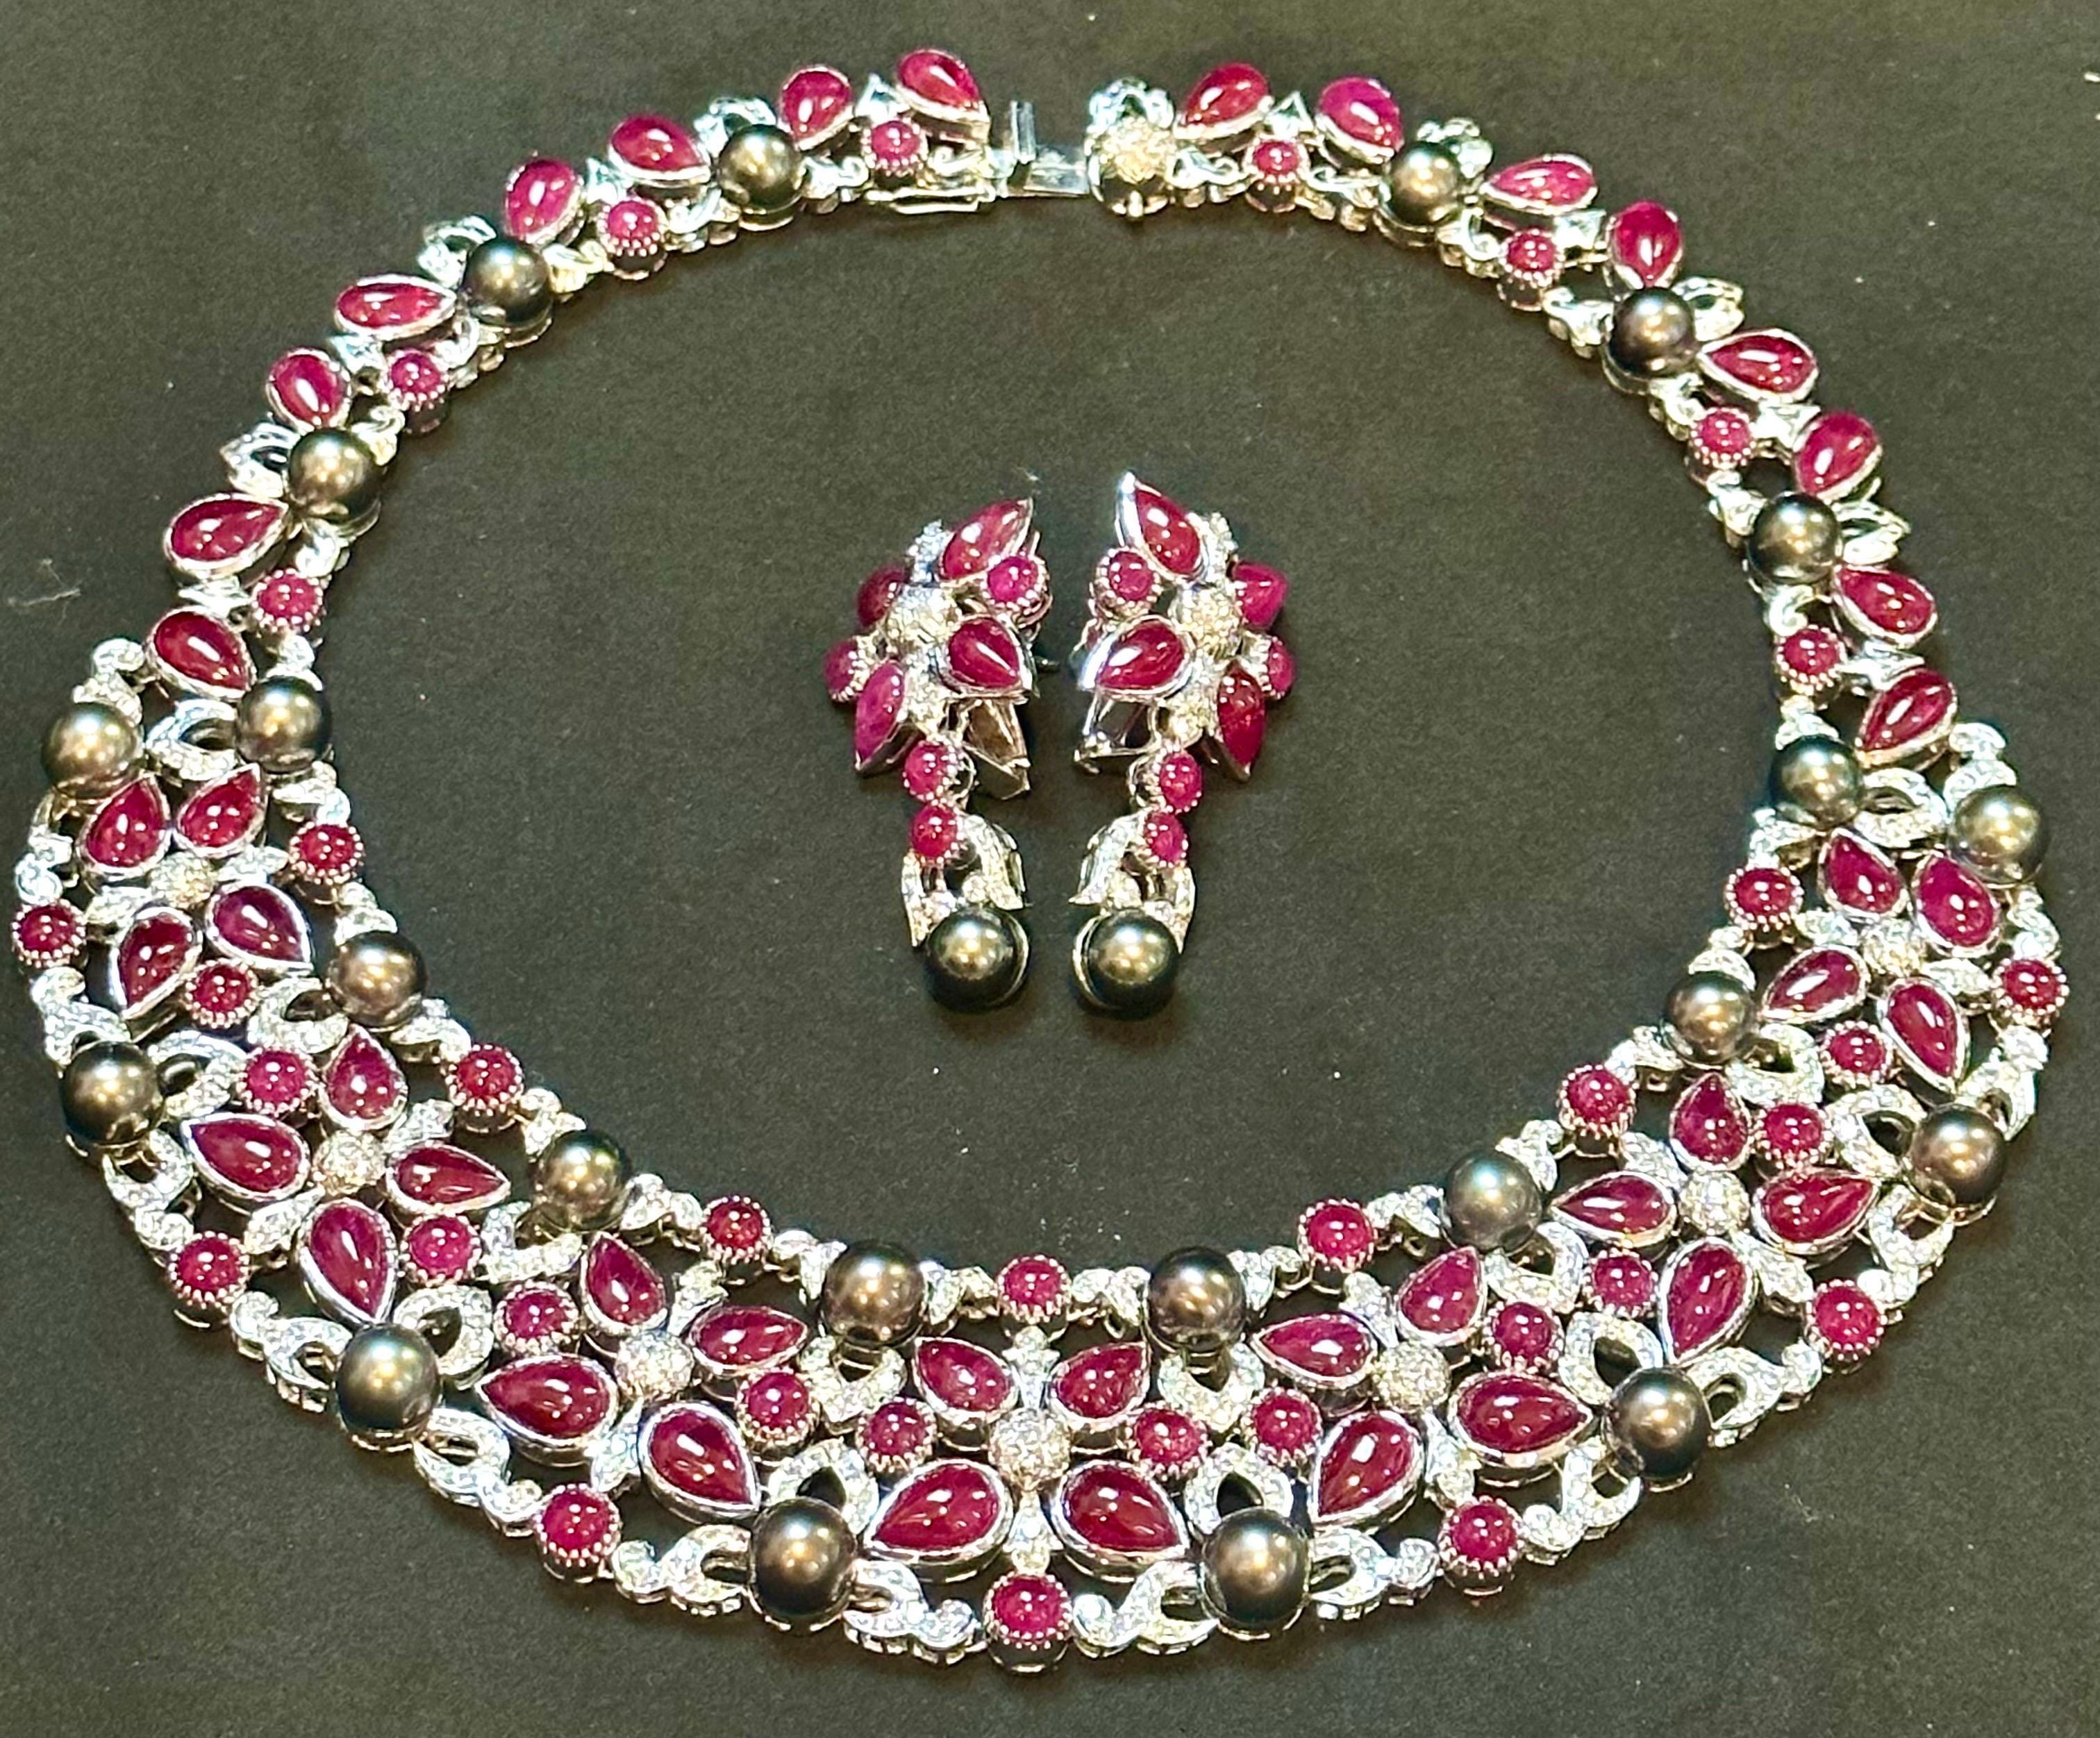 Presenting GIA Certified an opulent blend of vintage charm and luxury, this collar necklace is truly exceptional. It boasts an array of 52 pear-shaped natural Burma ruby cabochons, 50 round Burma ruby cabochons, totaling captivating 140-carat Burma